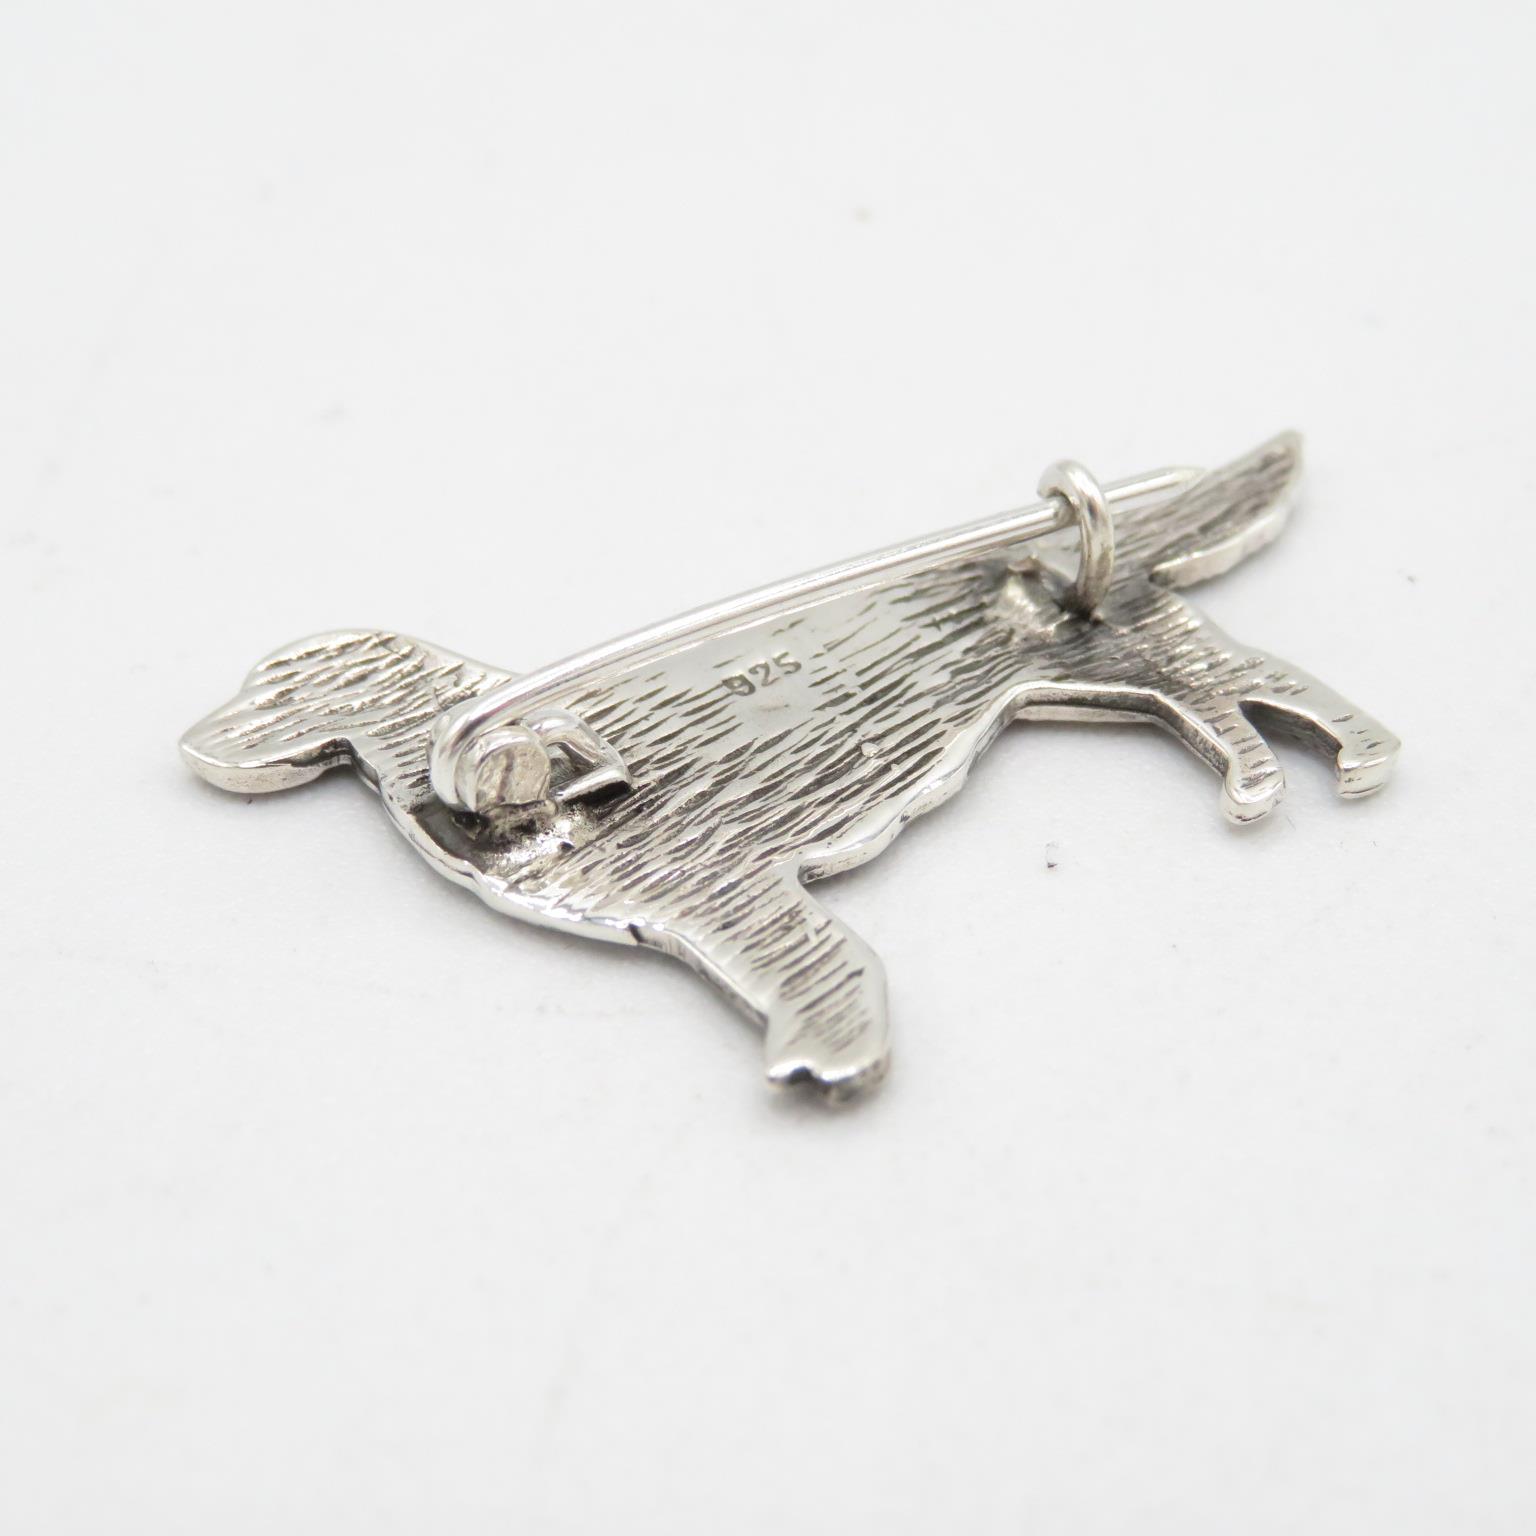 HM 925 Sterling Silver Labrador Retriever badge in excellent condition with great detail (4.4g) 40mm - Image 3 of 3